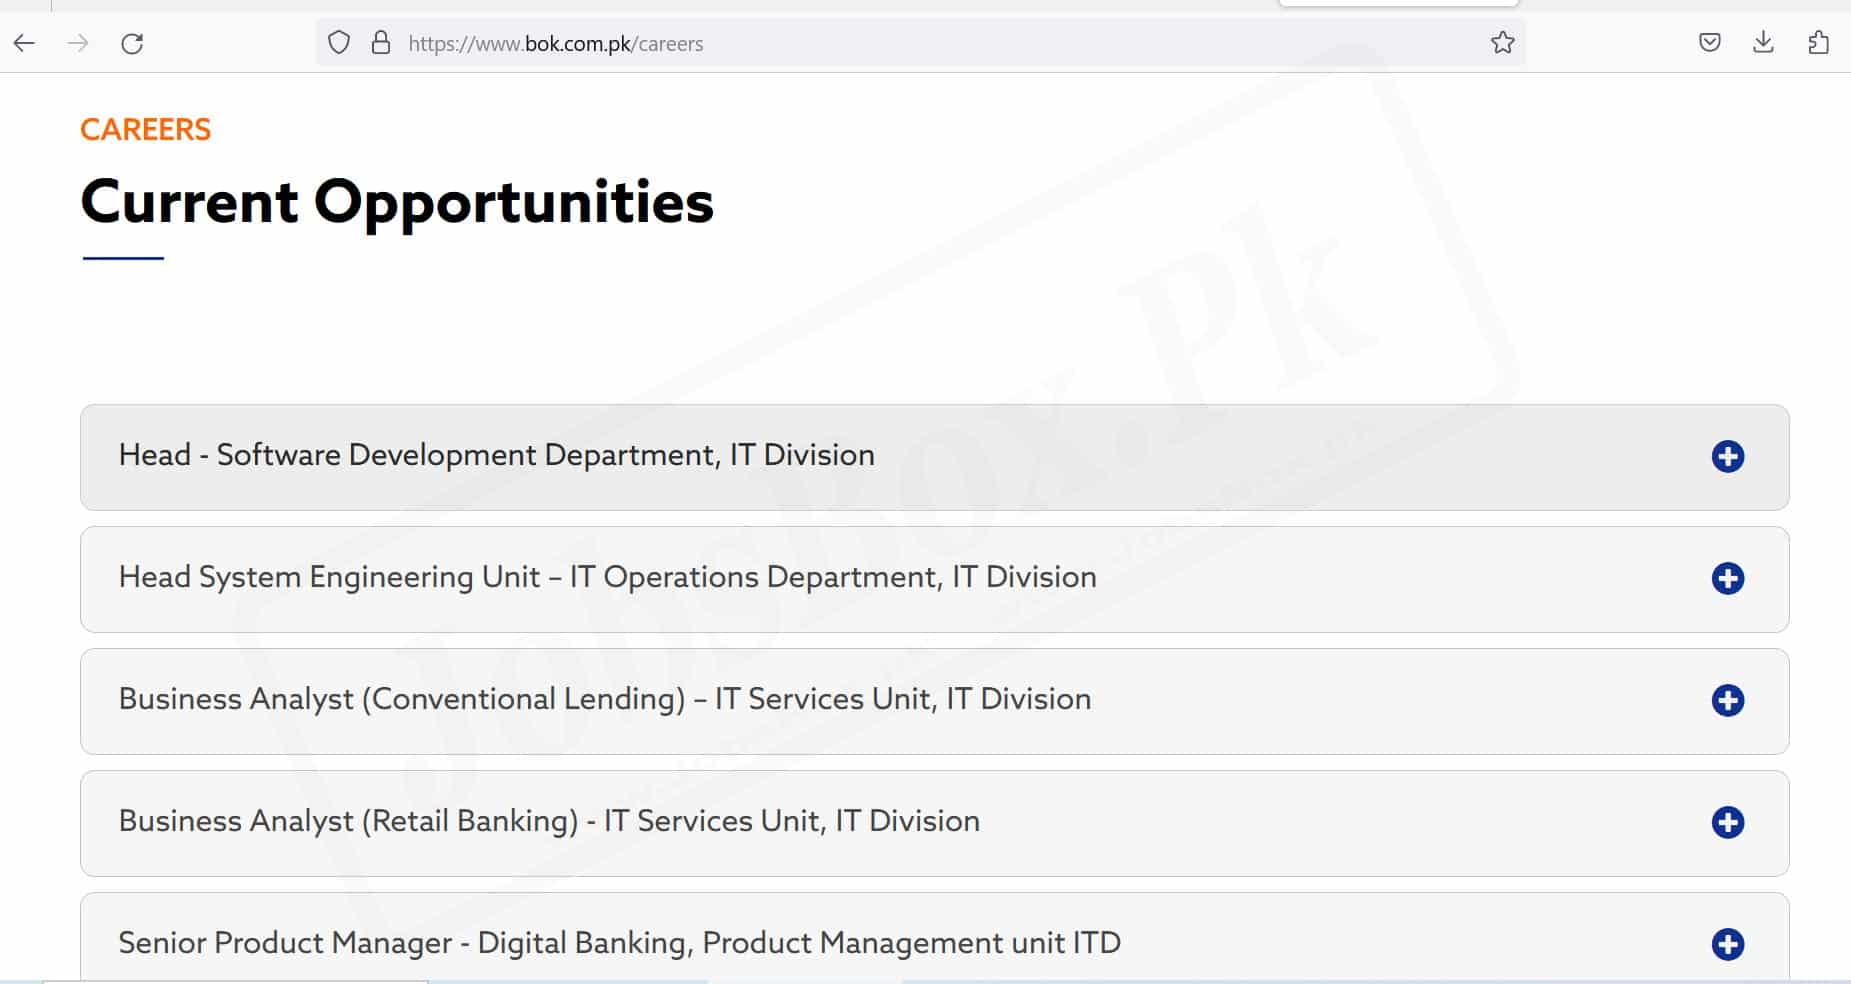 current opportunities at bok